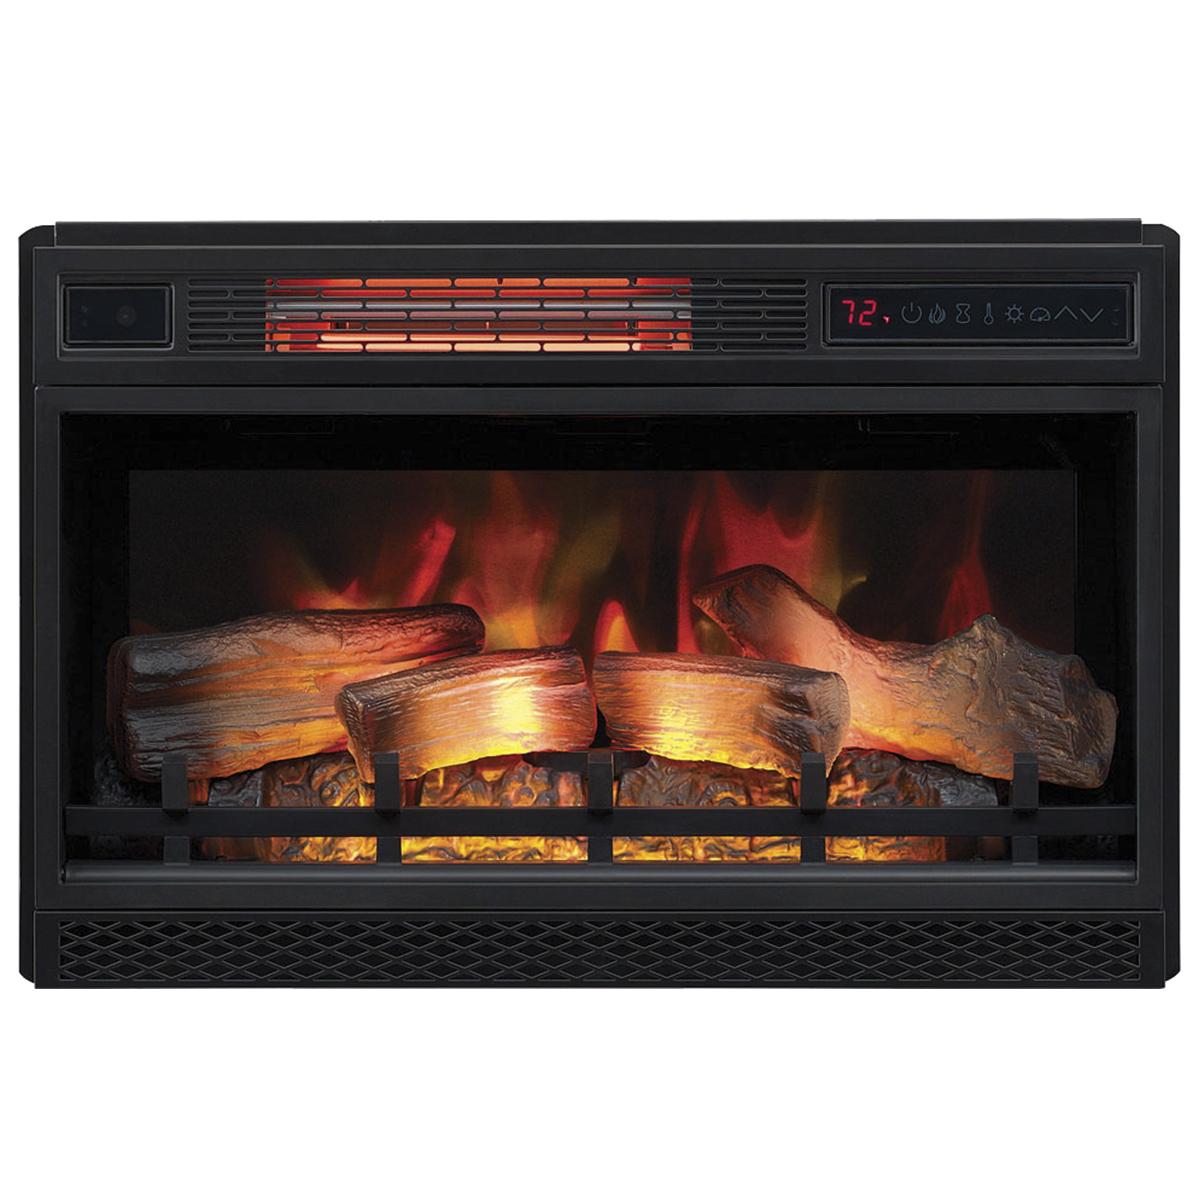 Fireplace Craft Awesome Fabio Flames Greatlin 3 Piece Fireplace Entertainment Wall